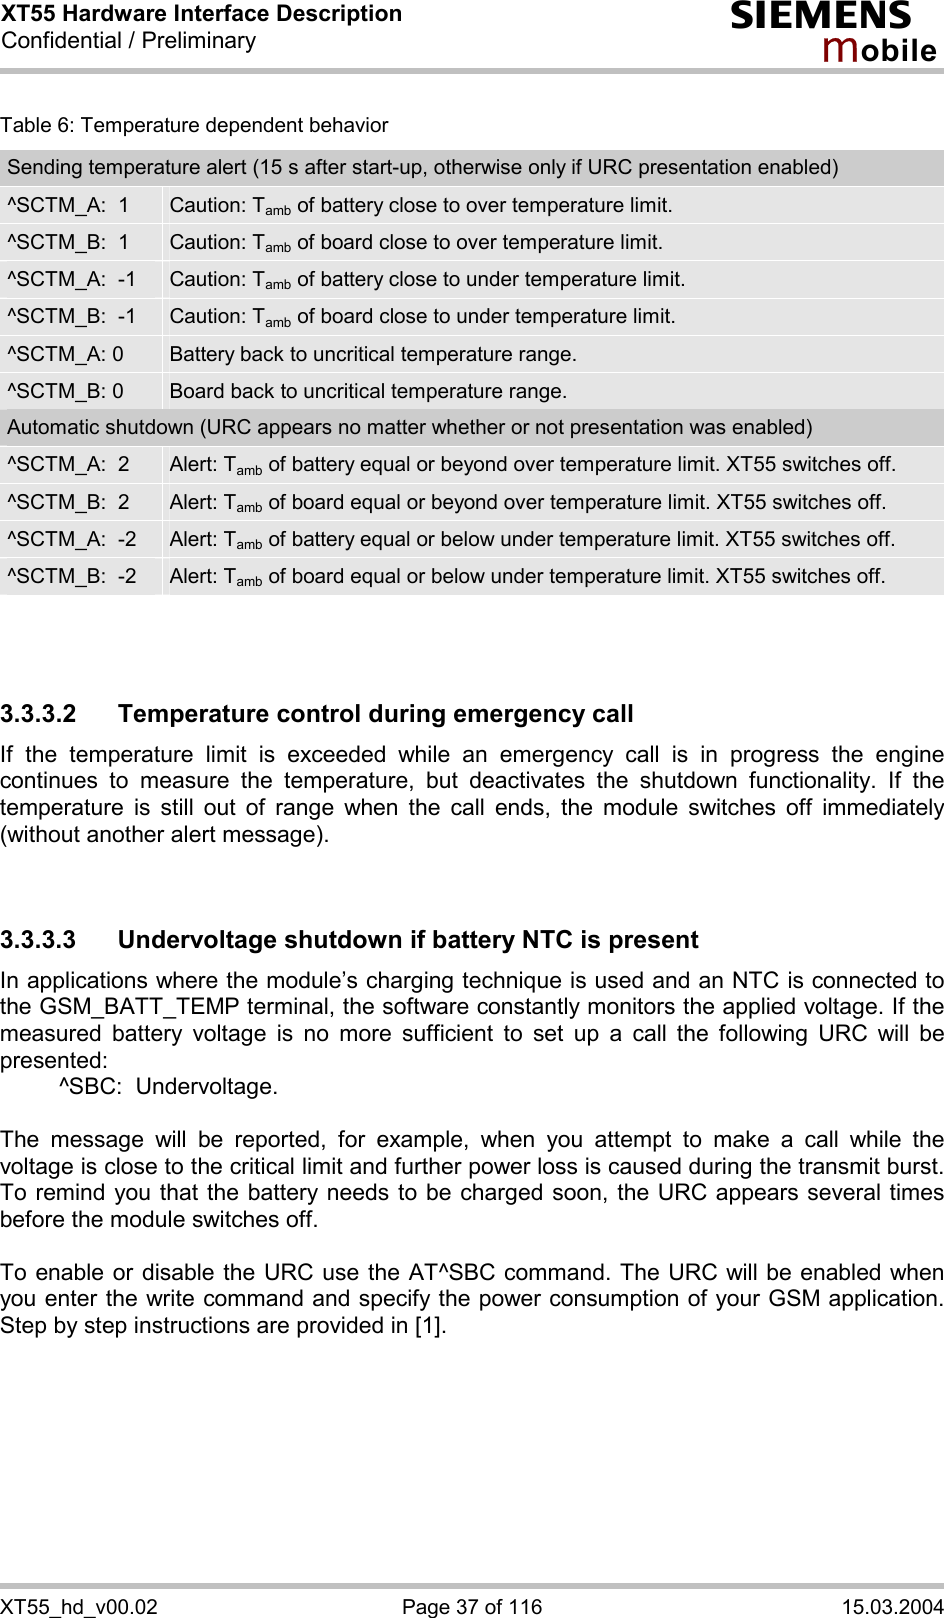 XT55 Hardware Interface Description Confidential / Preliminary s mo b i l e XT55_hd_v00.02  Page 37 of 116  15.03.2004 Table 6: Temperature dependent behavior Sending temperature alert (15 s after start-up, otherwise only if URC presentation enabled) ^SCTM_A:  1  Caution: Tamb of battery close to over temperature limit. ^SCTM_B:  1  Caution: Tamb of board close to over temperature limit. ^SCTM_A:  -1  Caution: Tamb of battery close to under temperature limit. ^SCTM_B:  -1  Caution: Tamb of board close to under temperature limit. ^SCTM_A: 0  Battery back to uncritical temperature range. ^SCTM_B: 0  Board back to uncritical temperature range. Automatic shutdown (URC appears no matter whether or not presentation was enabled) ^SCTM_A:  2  Alert: Tamb of battery equal or beyond over temperature limit. XT55 switches off. ^SCTM_B:  2  Alert: Tamb of board equal or beyond over temperature limit. XT55 switches off. ^SCTM_A:  -2  Alert: Tamb of battery equal or below under temperature limit. XT55 switches off. ^SCTM_B:  -2  Alert: Tamb of board equal or below under temperature limit. XT55 switches off.    3.3.3.2  Temperature control during emergency call If the temperature limit is exceeded while an emergency call is in progress the engine continues to measure the temperature, but deactivates the shutdown functionality. If the temperature is still out of range when the call ends, the module switches off immediately (without another alert message).   3.3.3.3 Undervoltage shutdown if battery NTC is present In applications where the module’s charging technique is used and an NTC is connected to the GSM_BATT_TEMP terminal, the software constantly monitors the applied voltage. If the measured battery voltage is no more sufficient to set up a call the following URC will be presented:    ^SBC:  Undervoltage.  The message will be reported, for example, when you attempt to make a call while the voltage is close to the critical limit and further power loss is caused during the transmit burst. To remind you that the battery needs to be charged soon, the URC appears several times before the module switches off.   To enable or disable the URC use the AT^SBC command. The URC will be enabled when you enter the write command and specify the power consumption of your GSM application. Step by step instructions are provided in [1].   